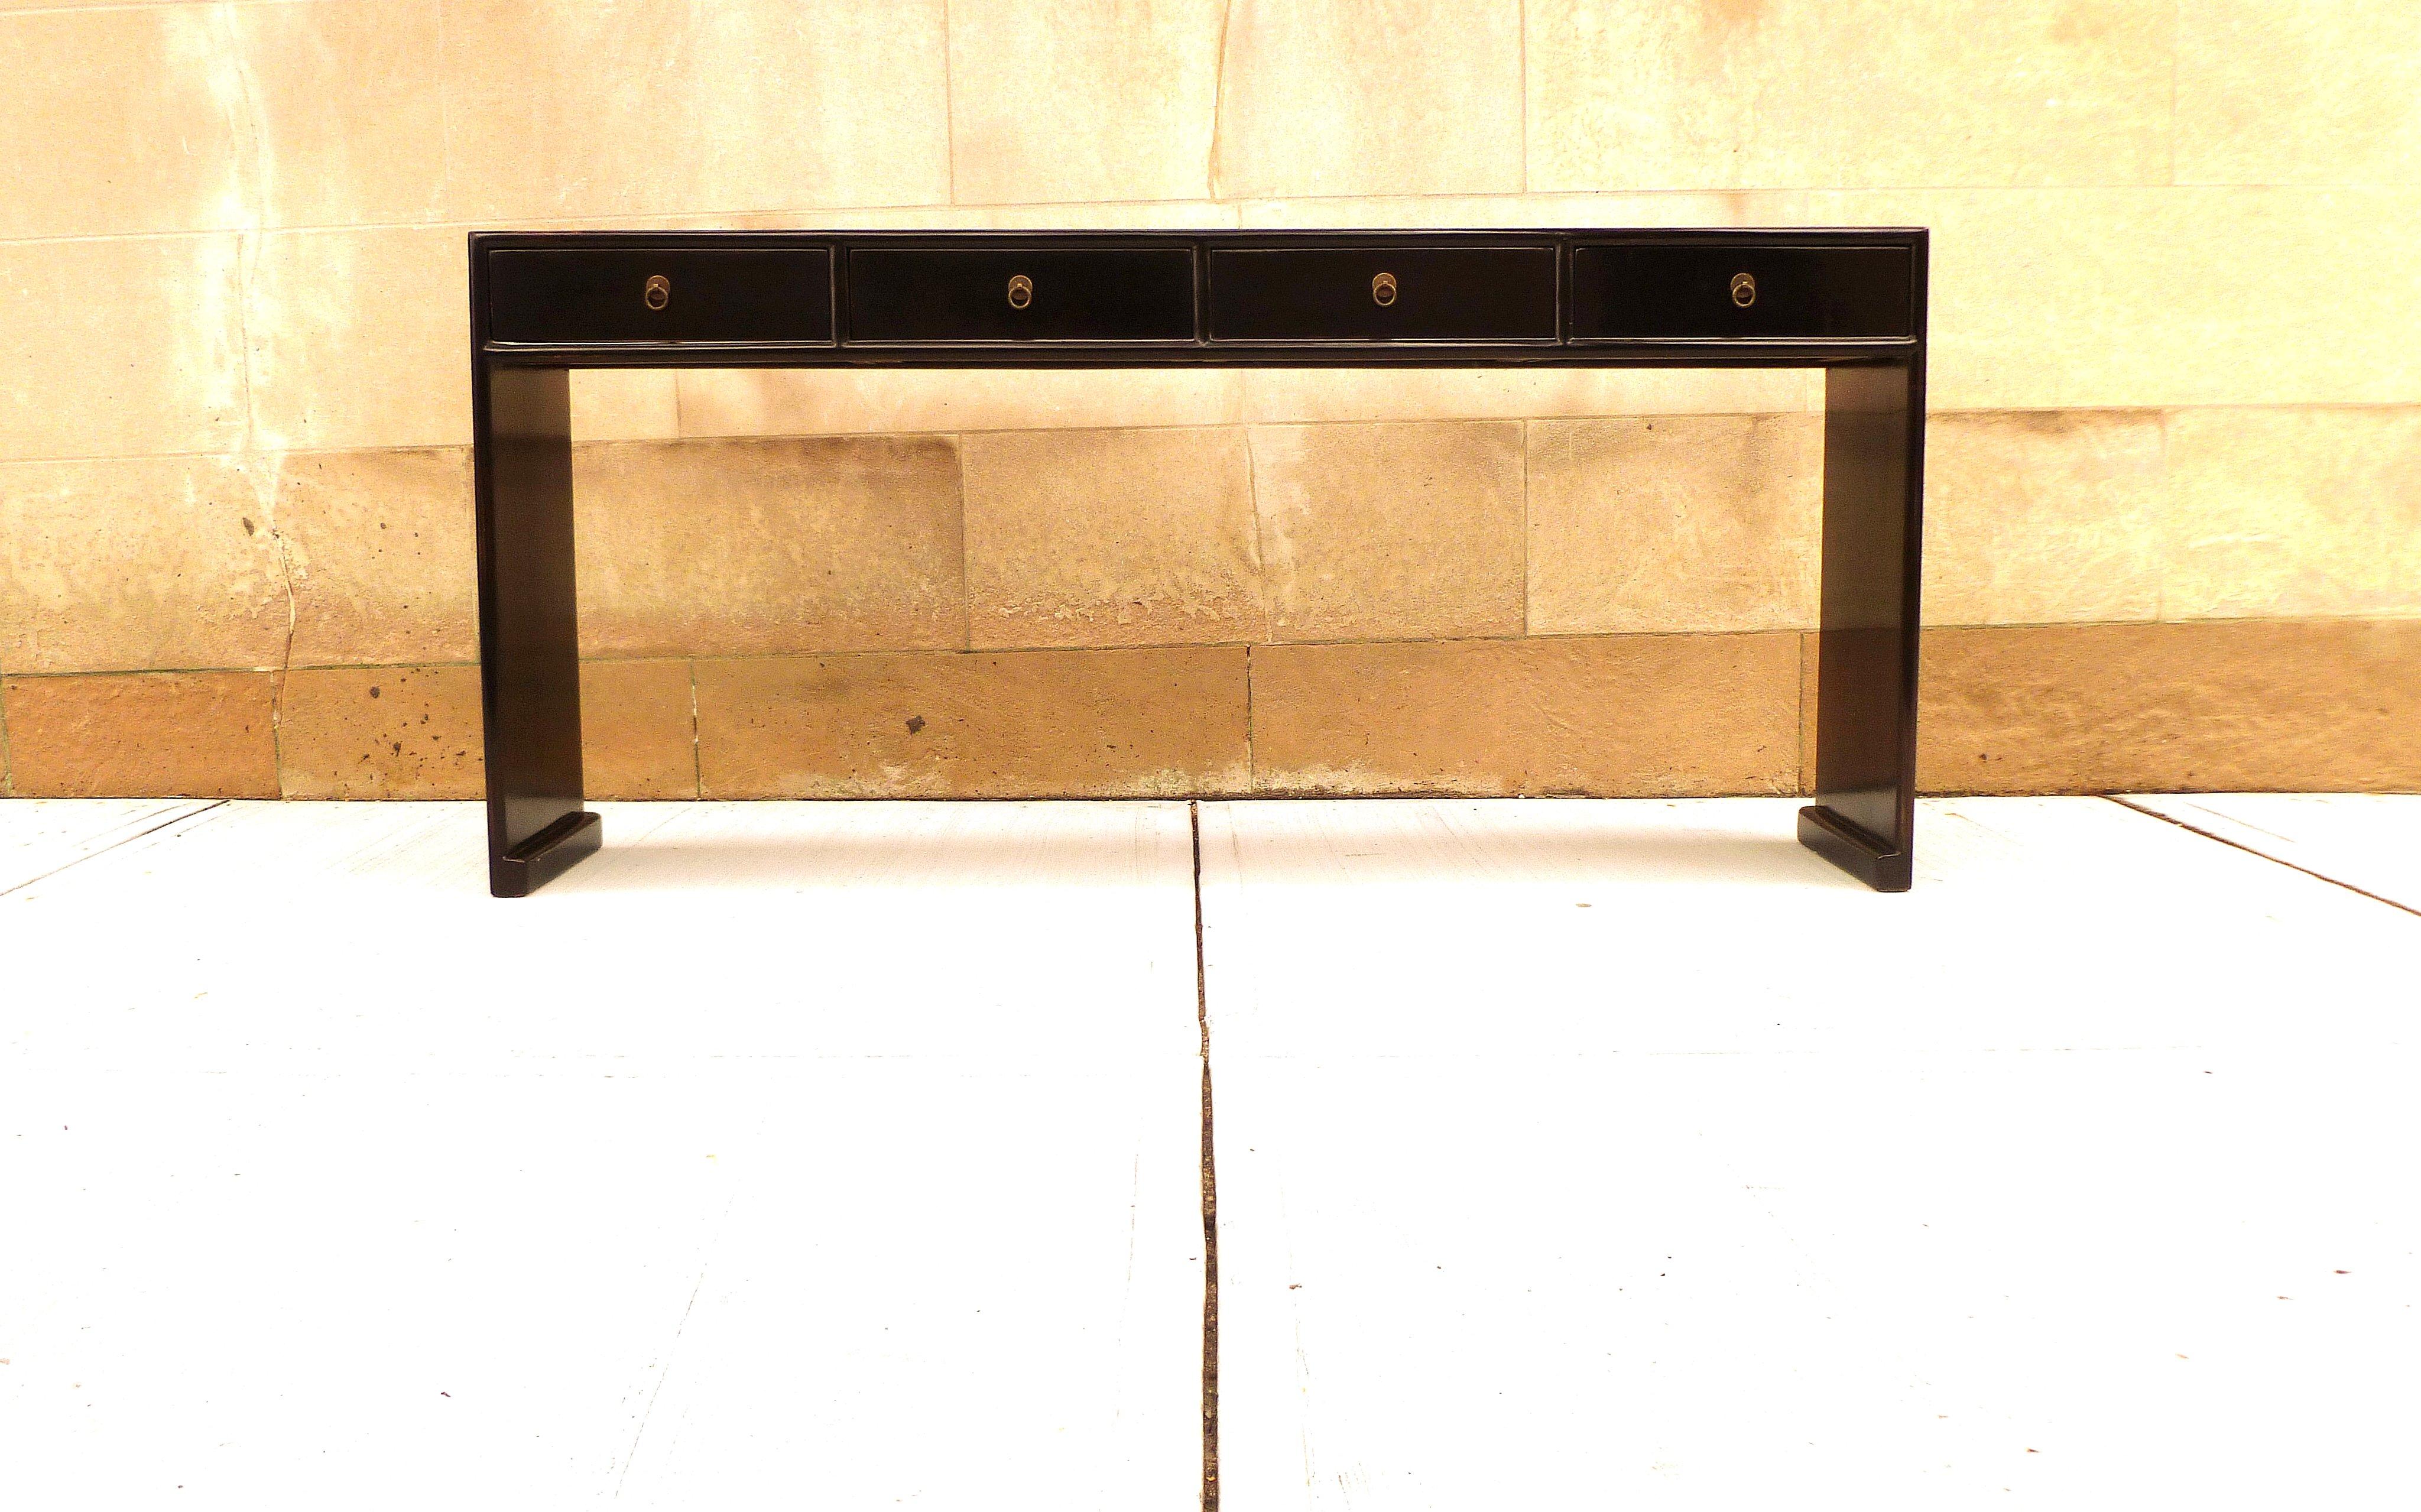 Fine black lacquer console table with four drawers, waterfall legs, brass fitting, elegant and simple form, beautiful lines. We carry fine quality furniture with elegant finished and has been appeared many times in 